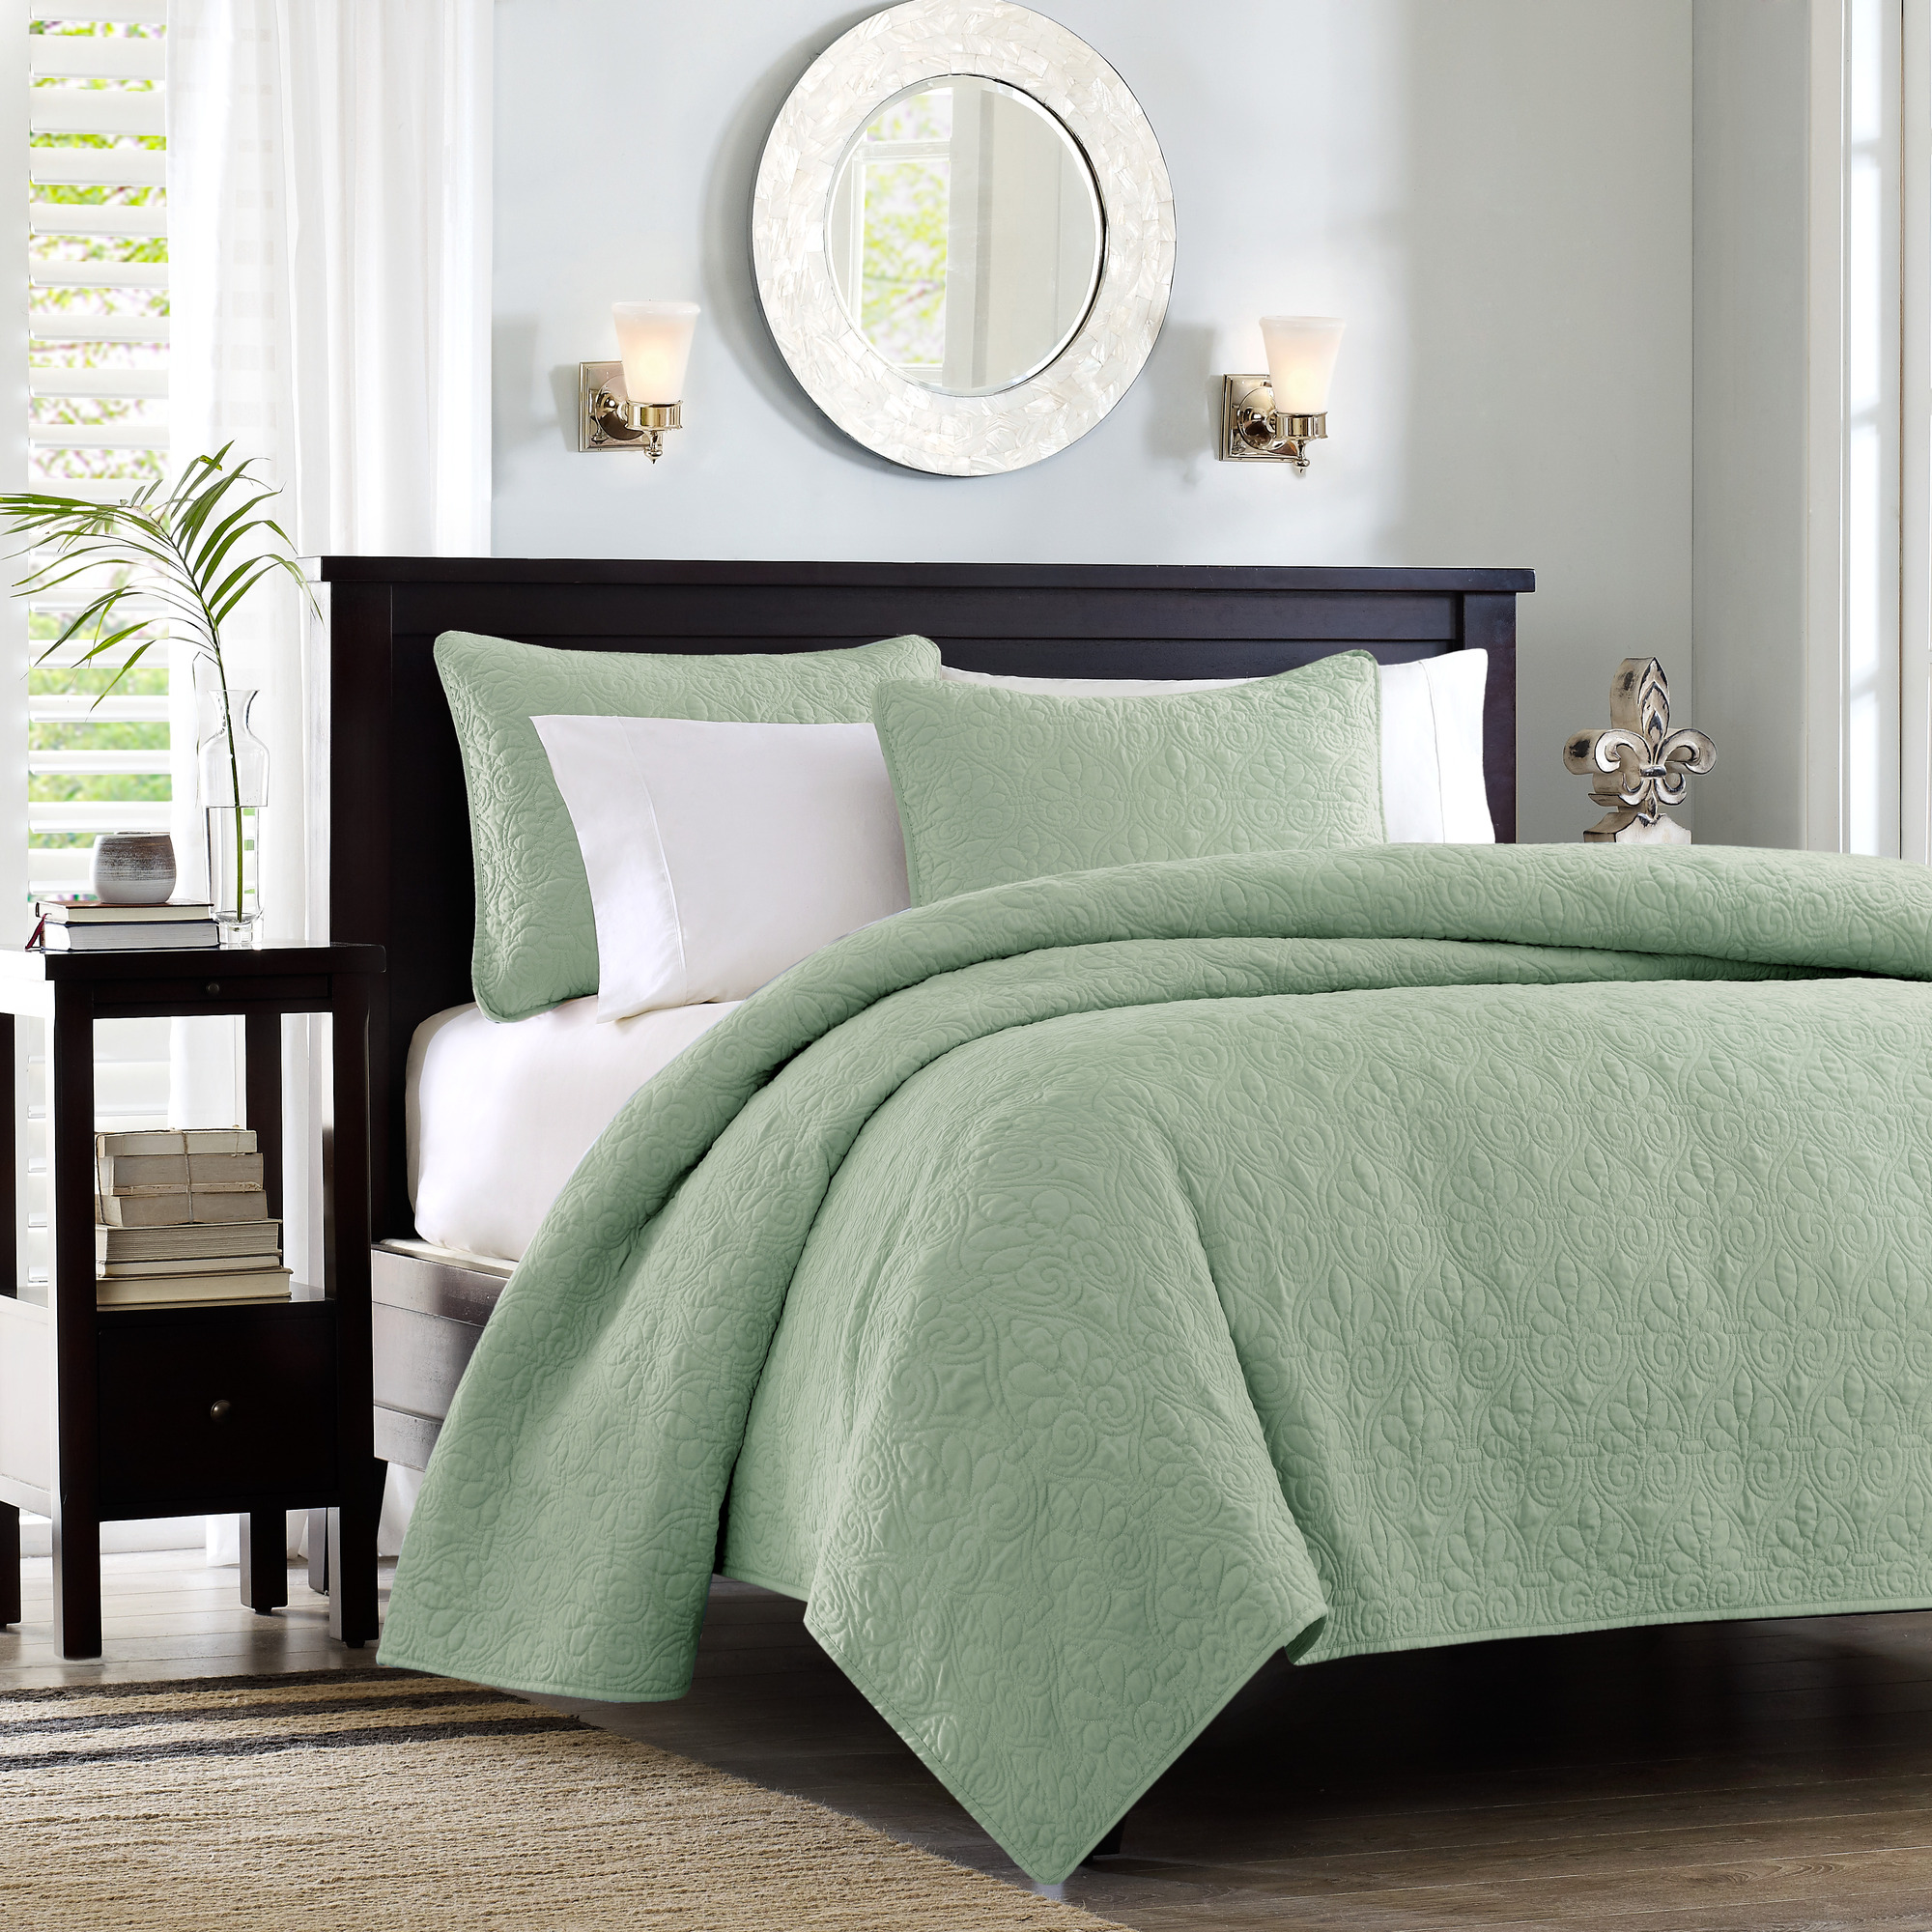 Home Essence Vancouver Super Soft Reversible Coverlet Set, Green, Full/Queen - image 1 of 12